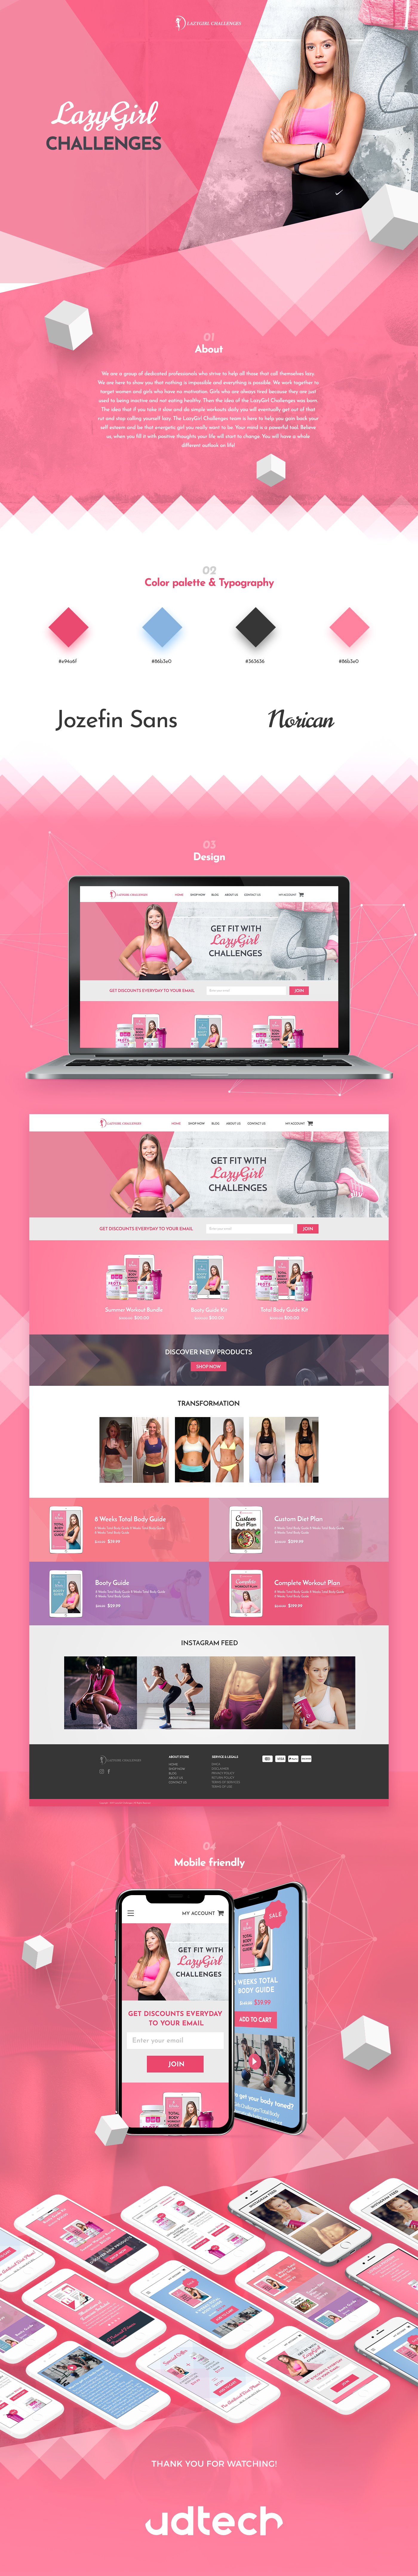 landing page store Web Design  Prototyping online store lazygirl   fitness diet plans inspiration Promotion